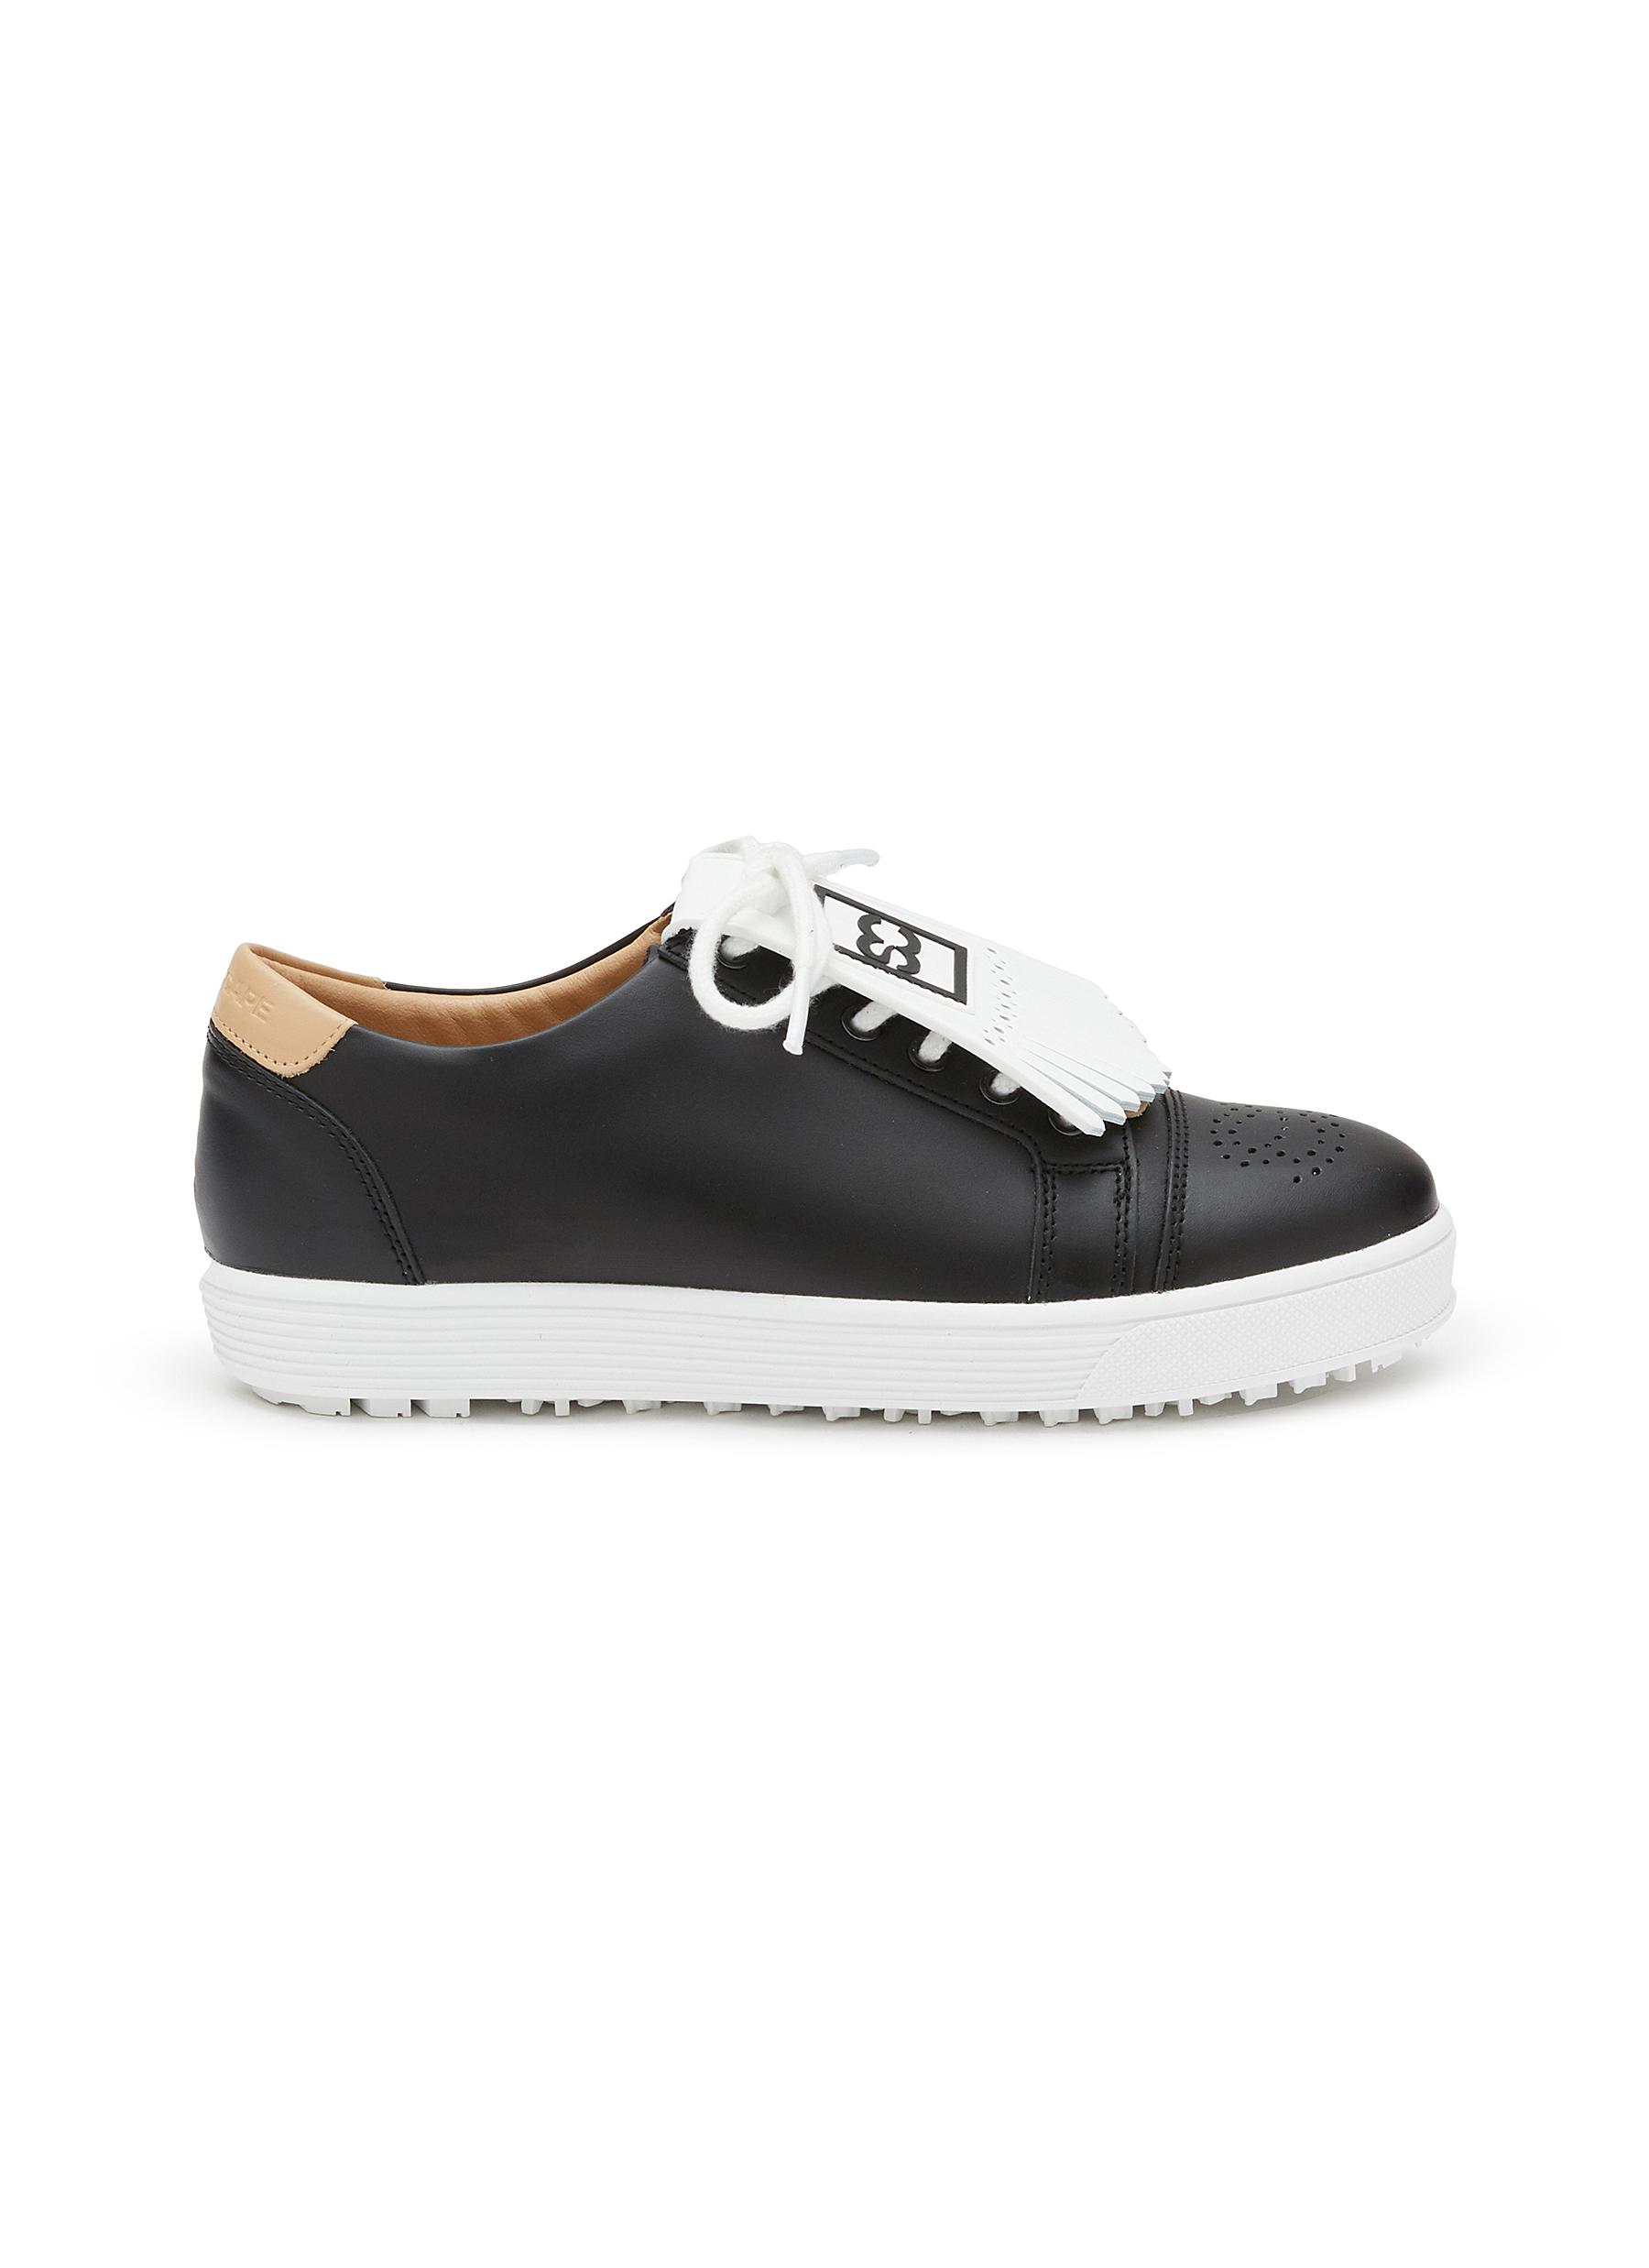 Southcape Removable Tassels Leather Sneakers In Black